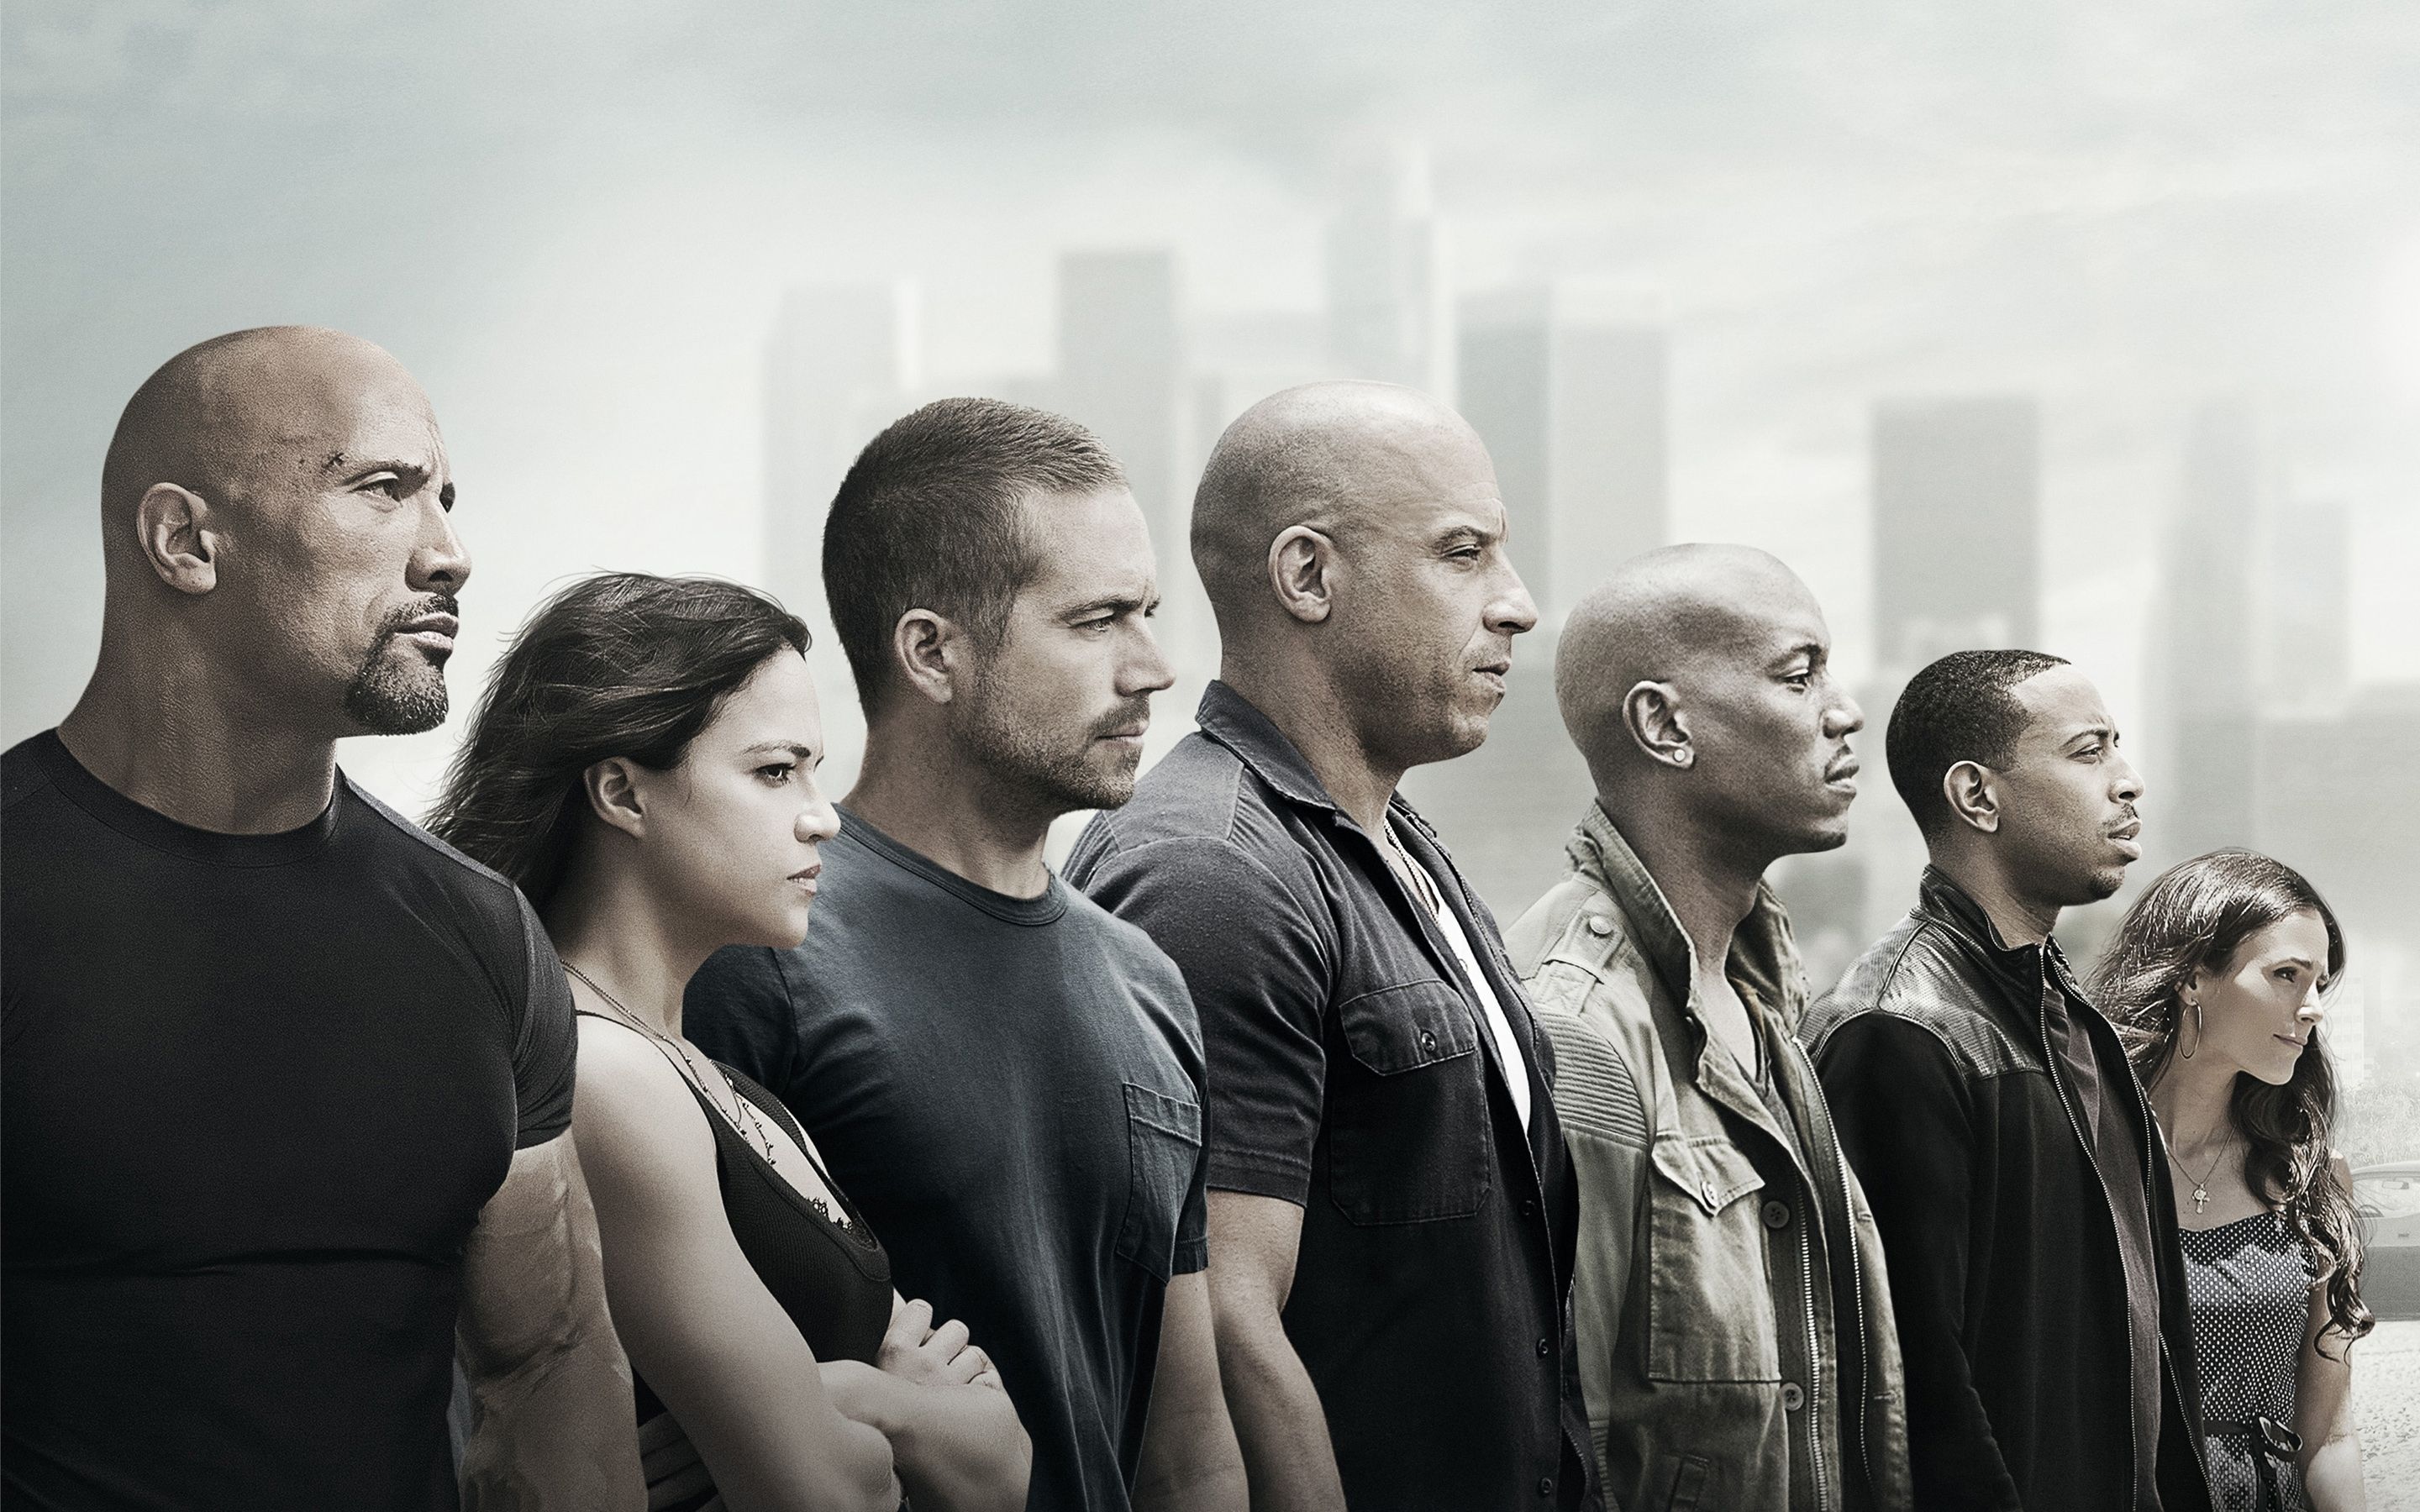 New Fast And Furious 7 Wallpaper FULL HD 1920×1080 For PC Desktop. Fast and furious, Movies, Furious movie